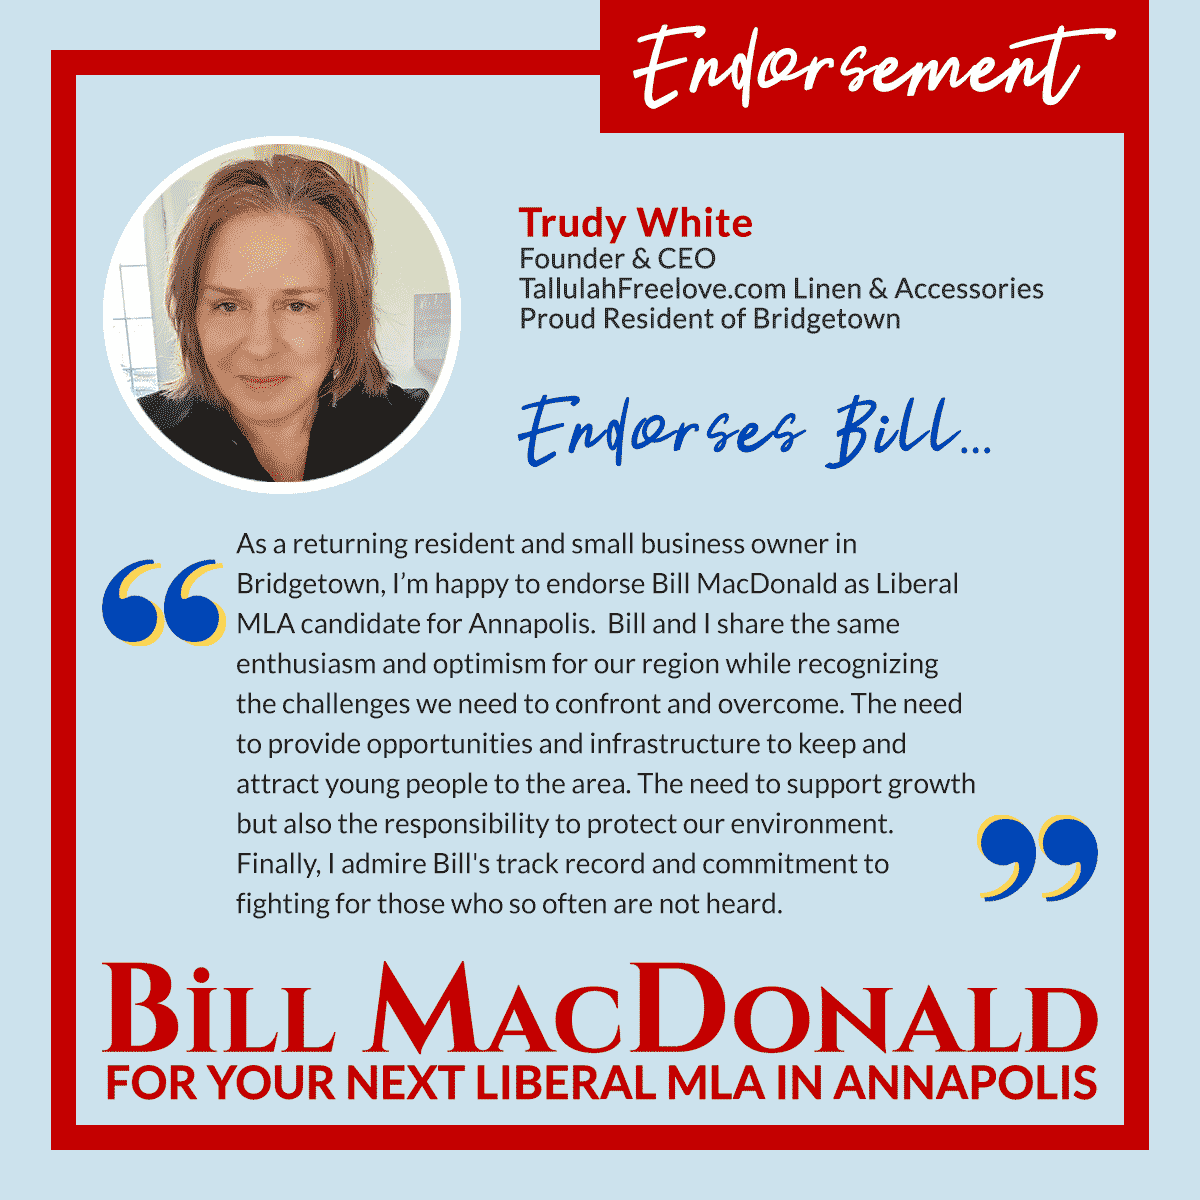 Trudy White endorses Bill MacDonald for your next Liberal MLA in Annapolis